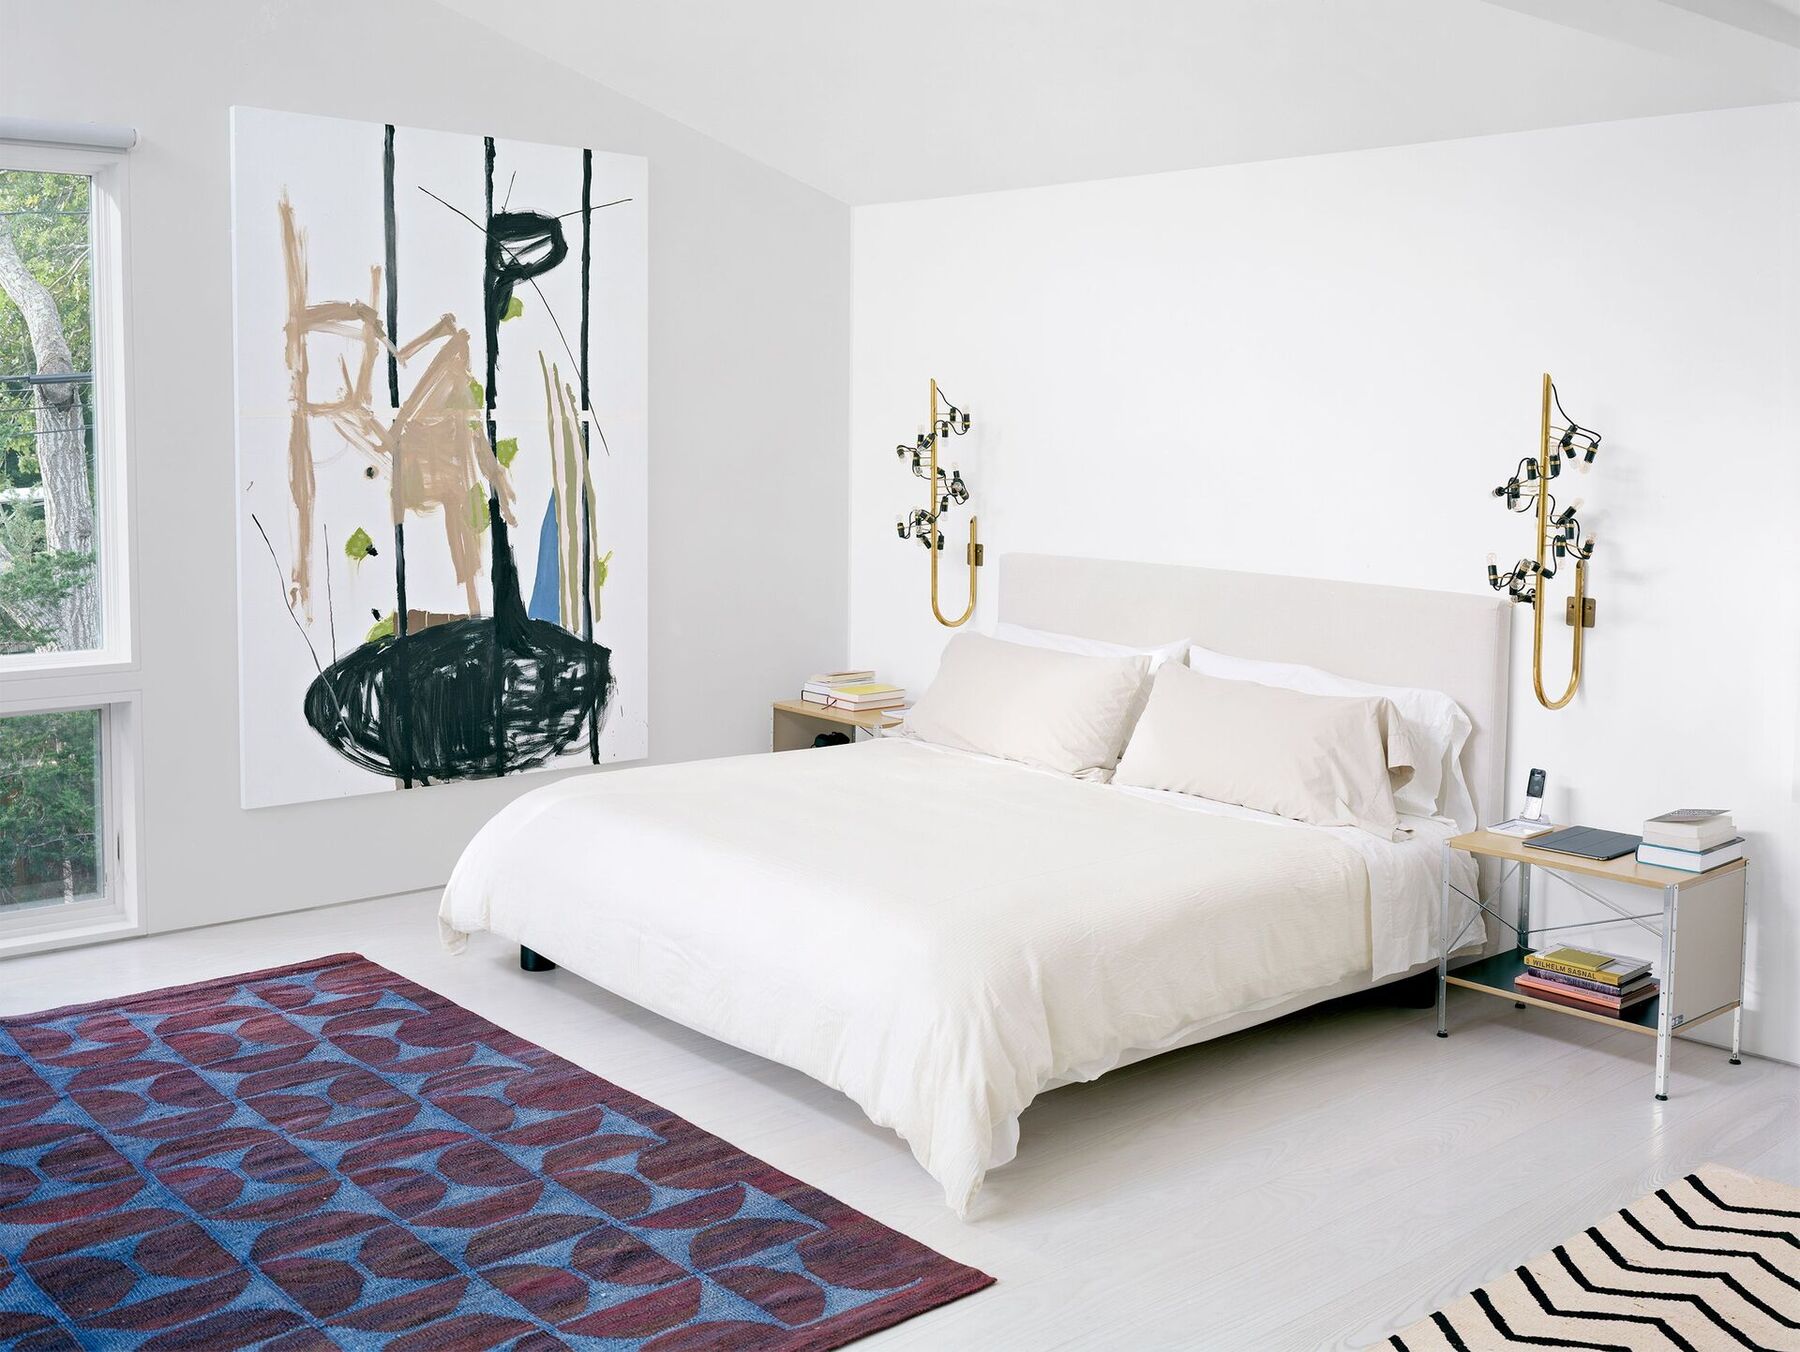 Minimalist Bedrooms: 10 Modern Ideas That Work In Any Home